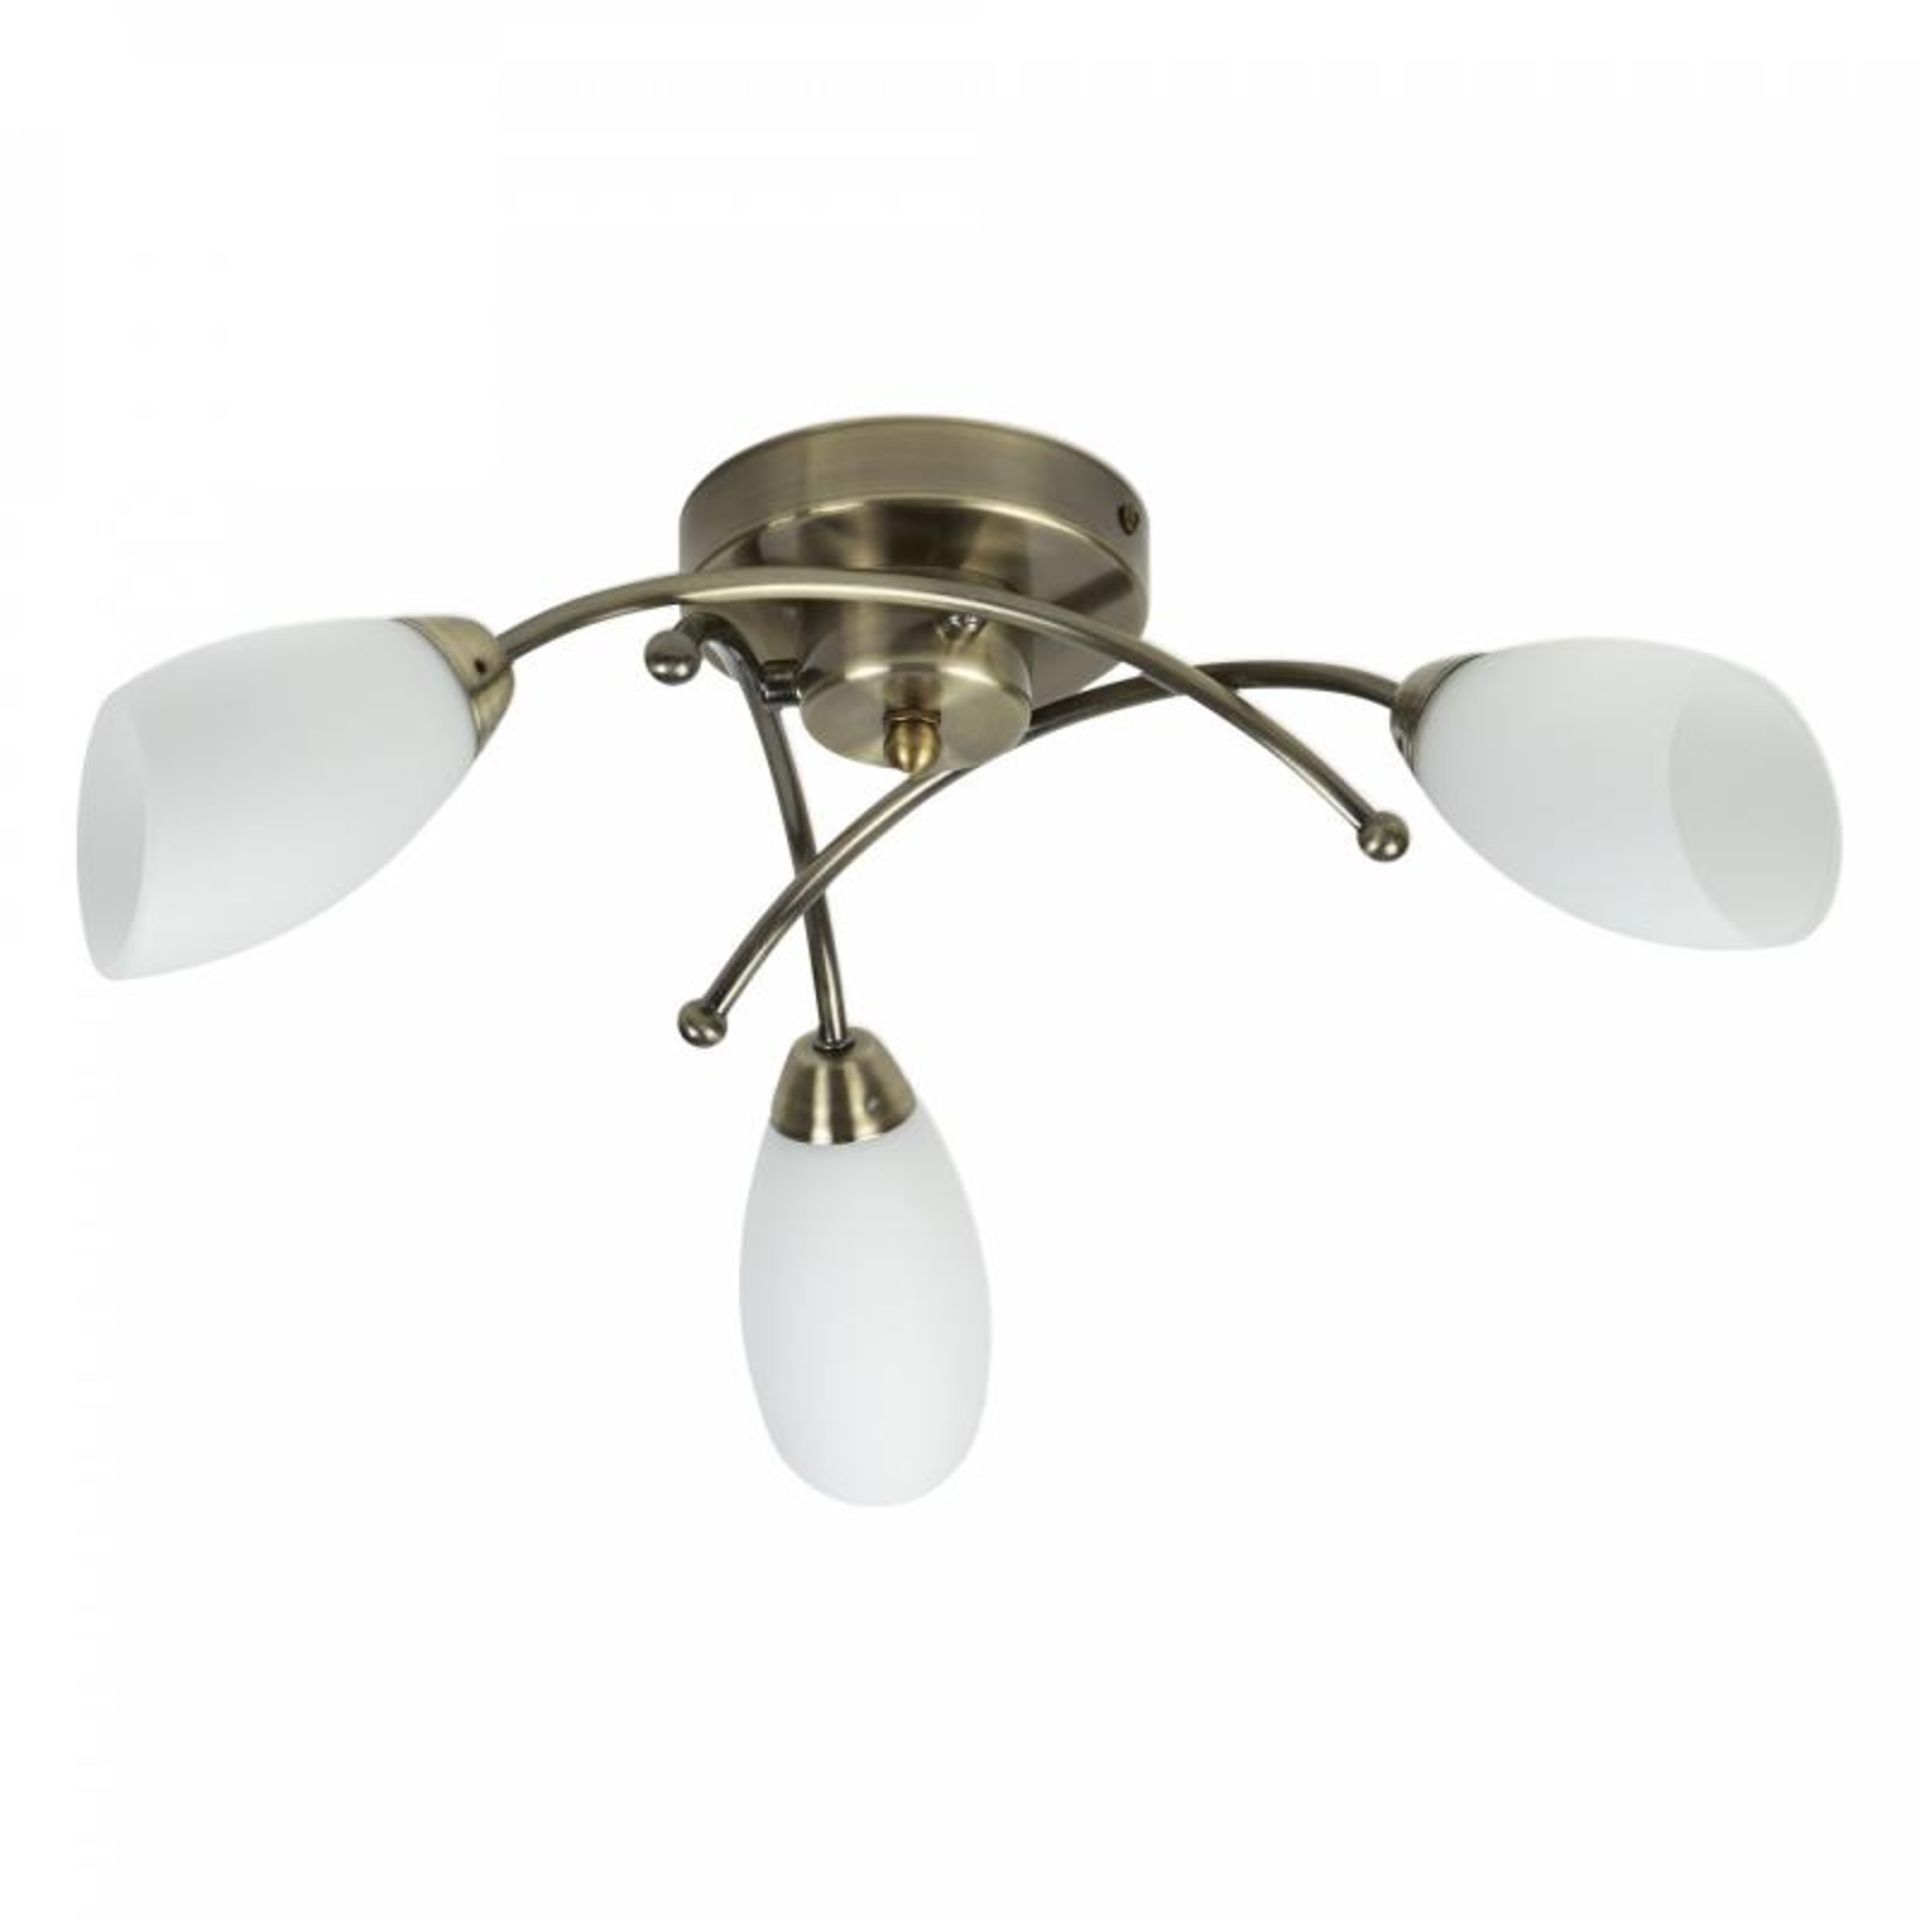 1 x Opera Antique Brass 3 Light Semi-flush Fitting With Opal Glass Shades - New Boxed Stock - CL323 - Image 2 of 2